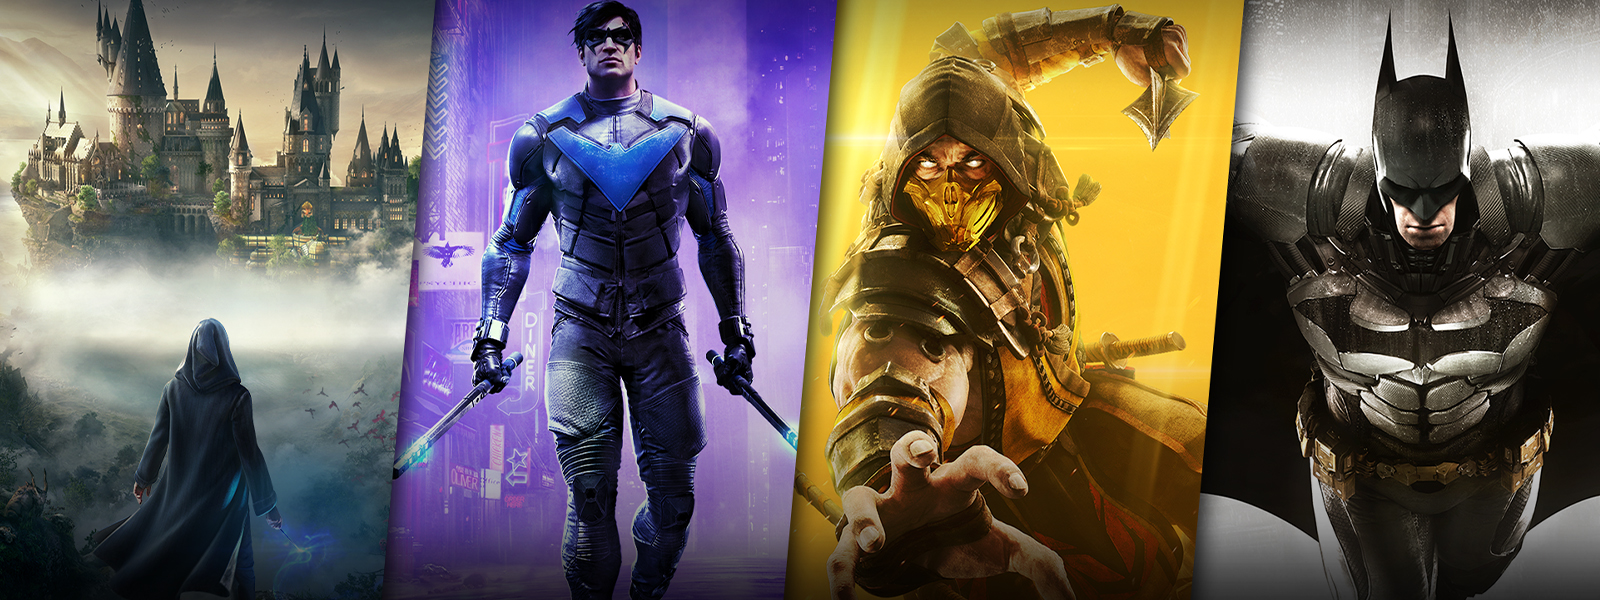 Character art from games that are part of the Warner Bros. 100th Anniversary Sale, including Hogwarts Legacy Xbox Series X|S Version, Gotham Knights, and Mortal Kombat 11.